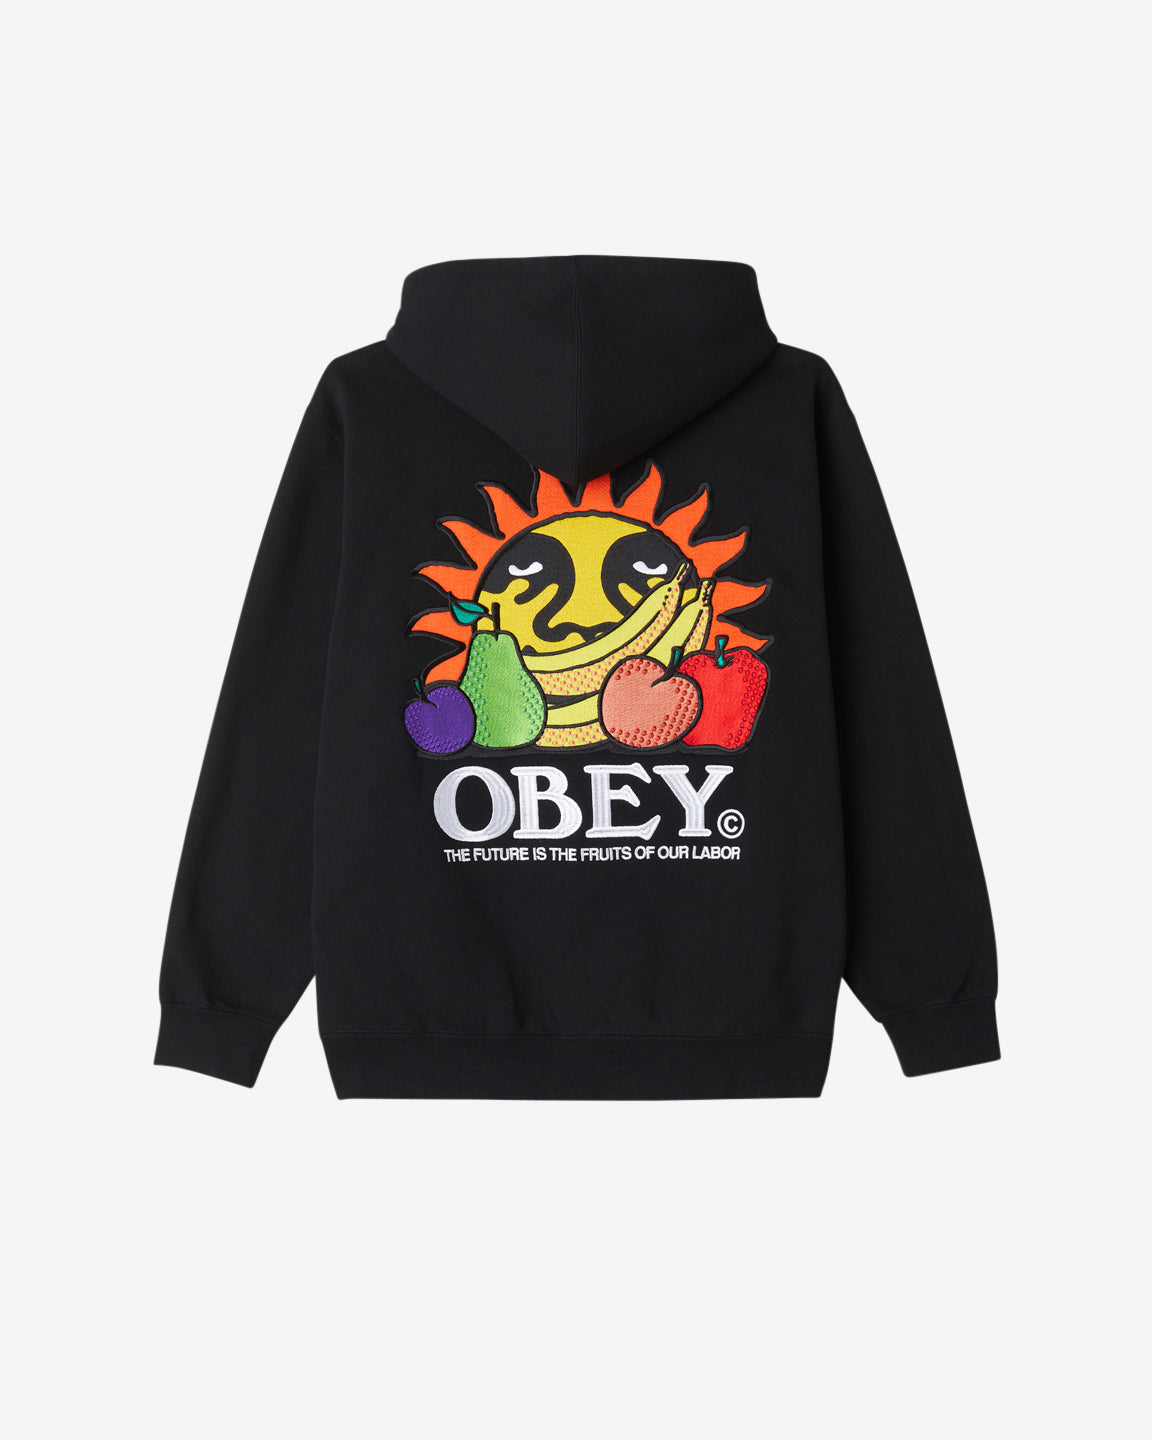 Obey Hoodie: The Ultimate Guide to Choosing the Right Fit